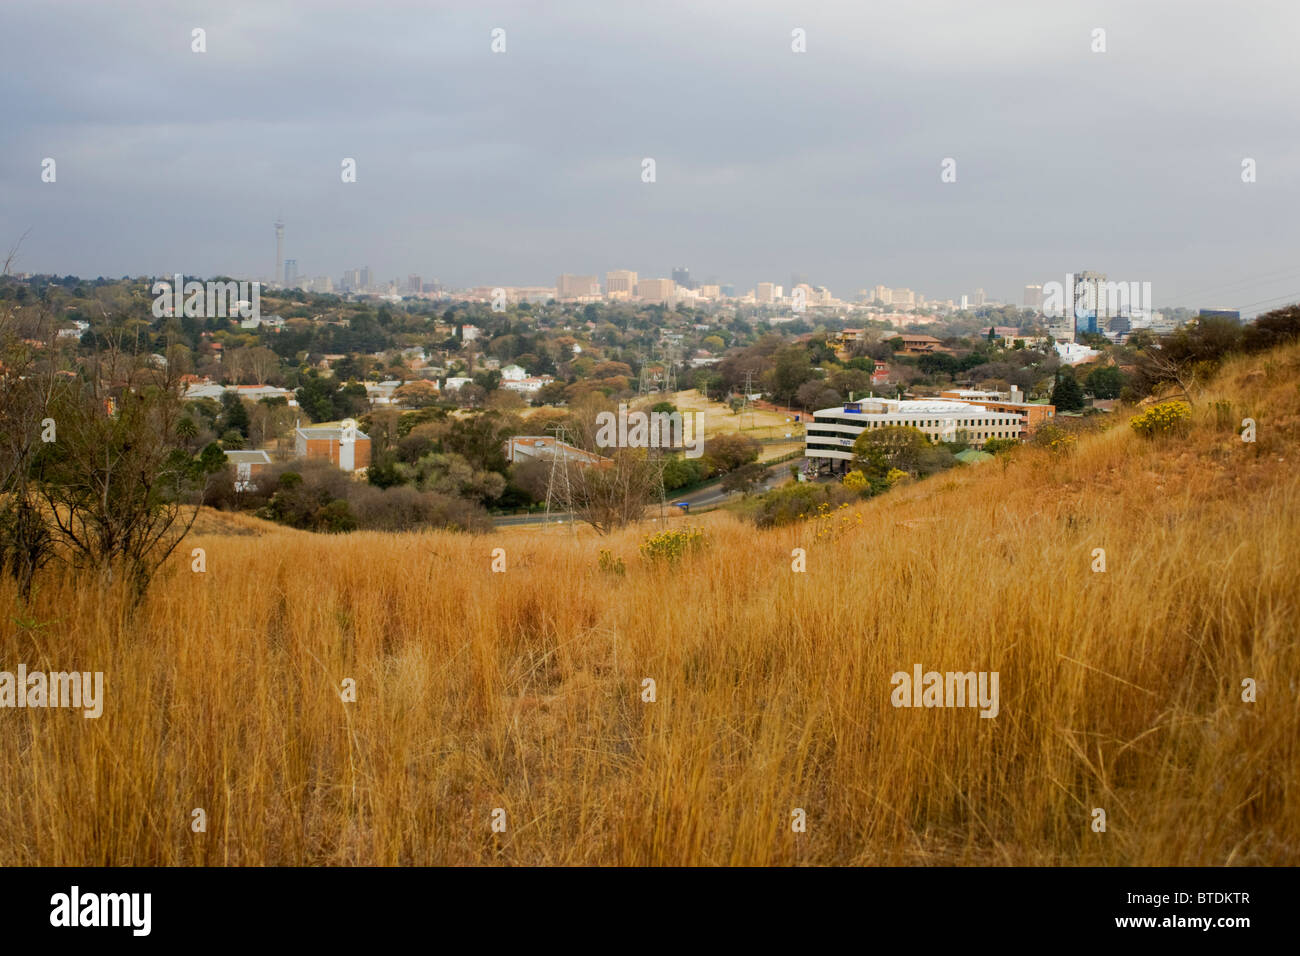 The Johannesburg skyline as seen from the Melville Koppies Stock Photo